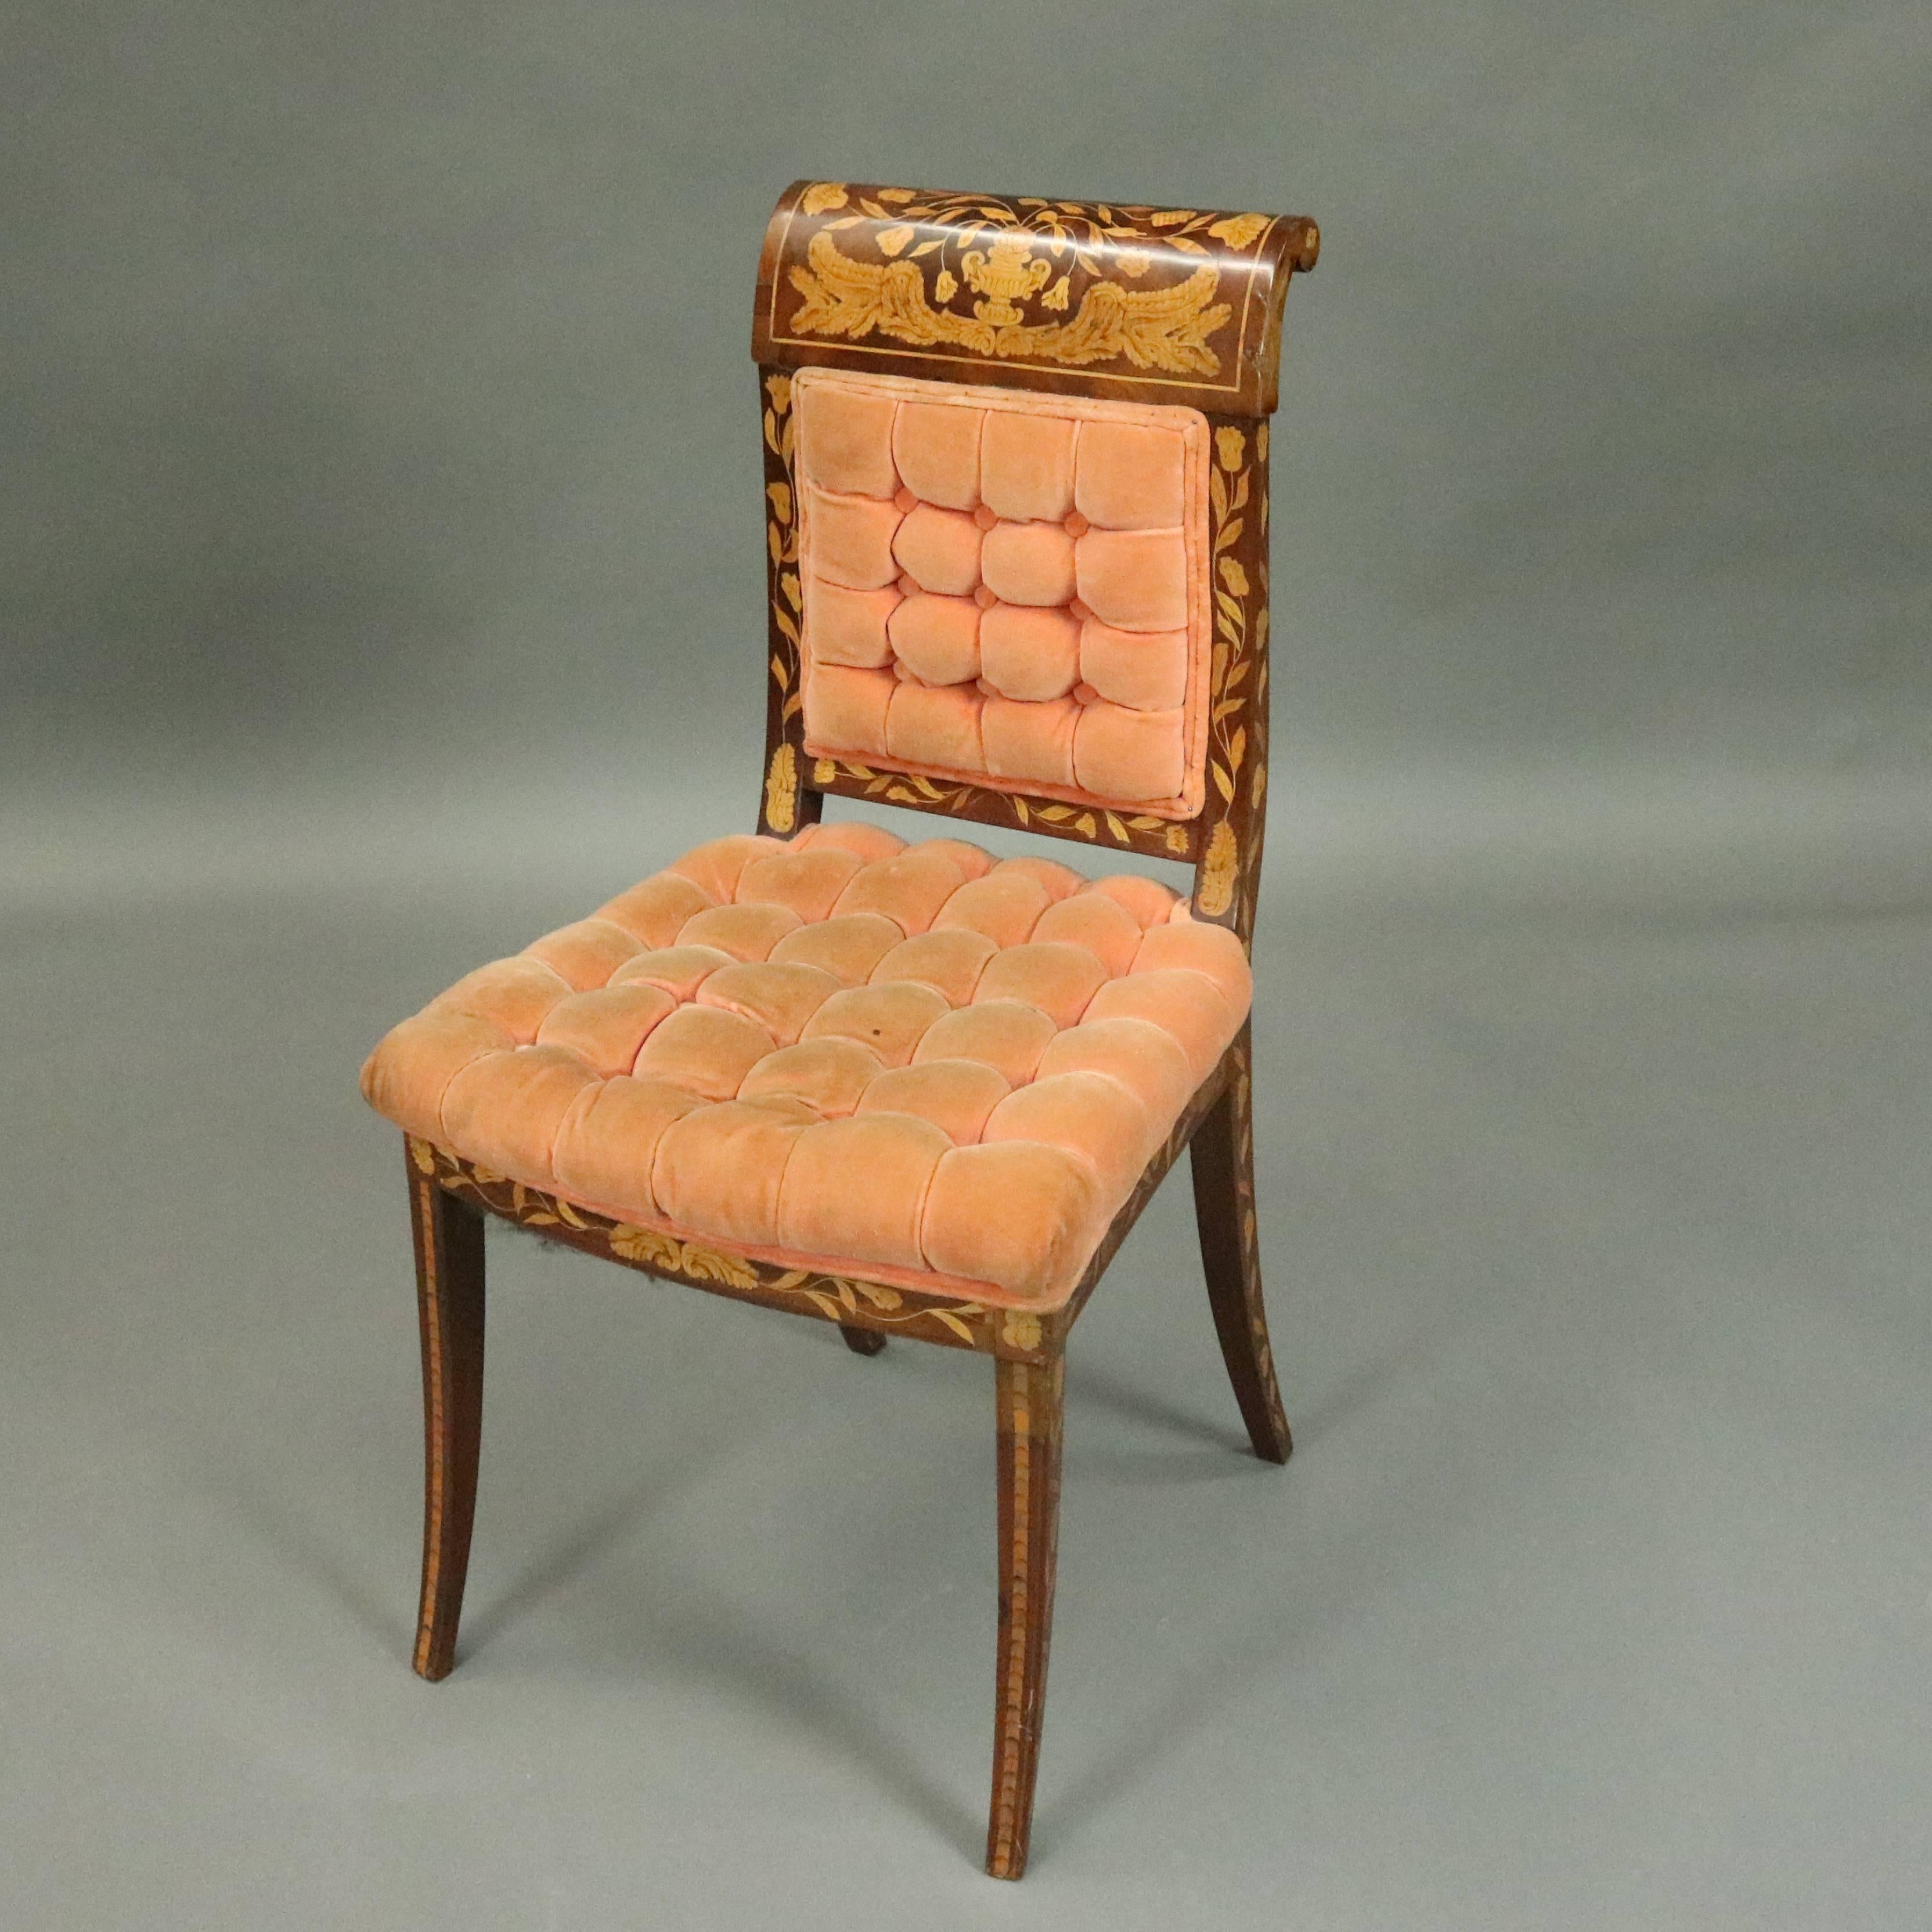 Antique Dutch marquetry side chair features mahogany construction with banding and all-over foliate satinwood inlay, buttoned upholstered seat and back, circa 1890.

Measures: 36" H x 18" W x 15" D x 19" seat height.